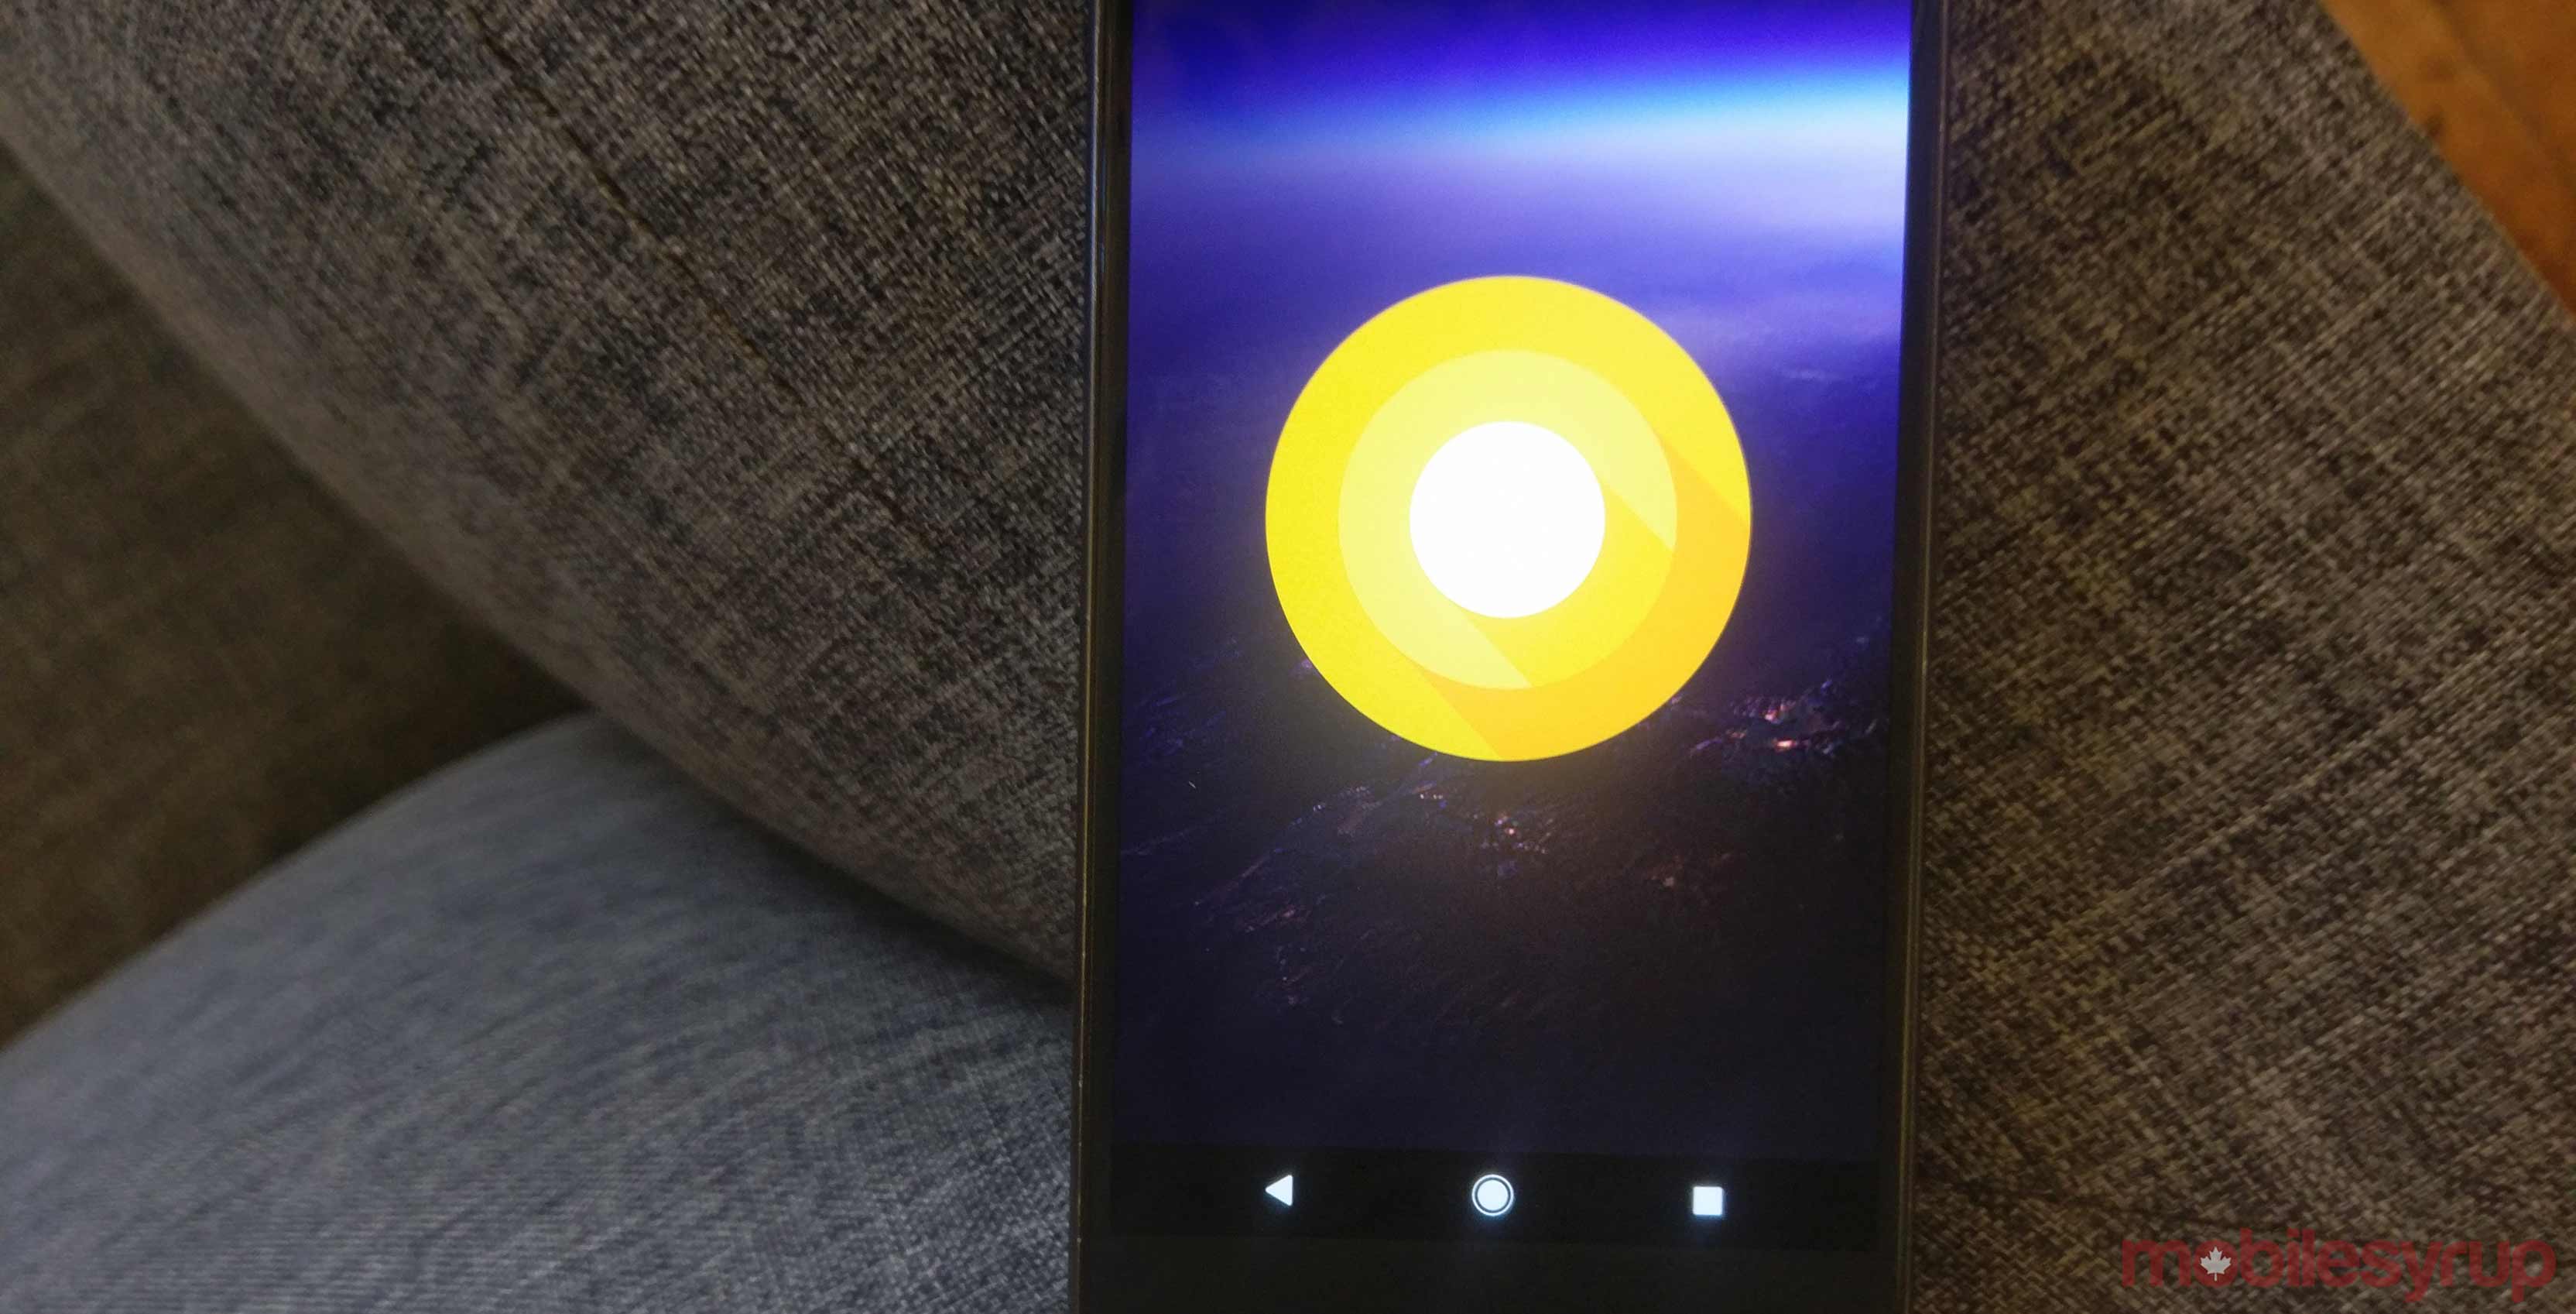 Android O on a pixel device